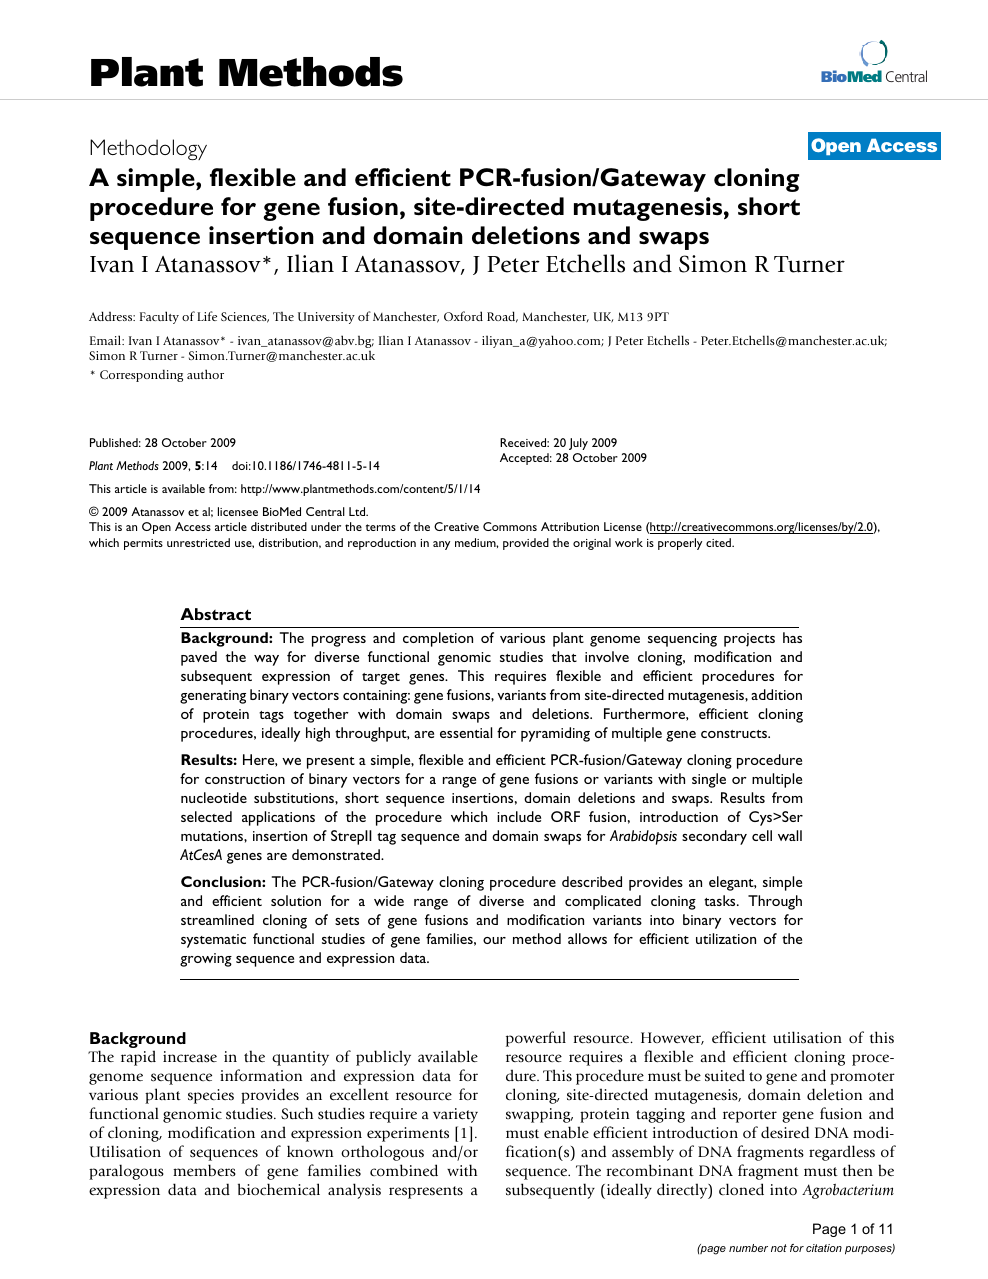 A Simple Flexible And Efficient Pcr Fusion Gateway Cloning Procedure For Gene Fusion Site Directed Mutagenesis Short Sequence Insertion And Domain Deletions And Swaps Topic Of Research Paper In Biological Sciences Download Scholarly Article